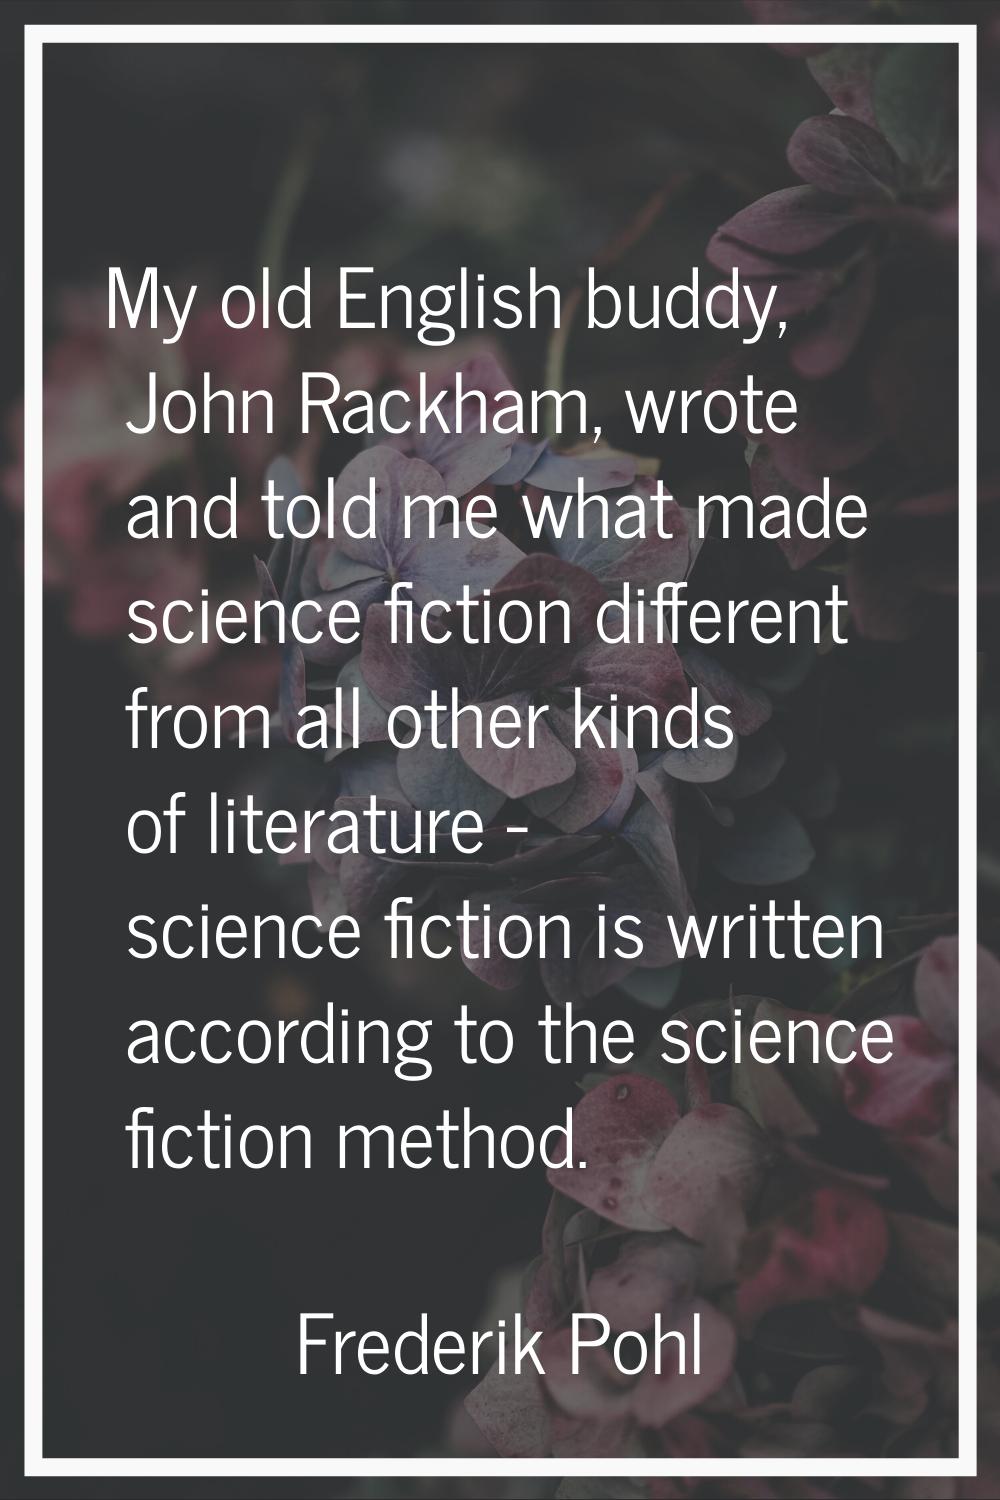 My old English buddy, John Rackham, wrote and told me what made science fiction different from all 